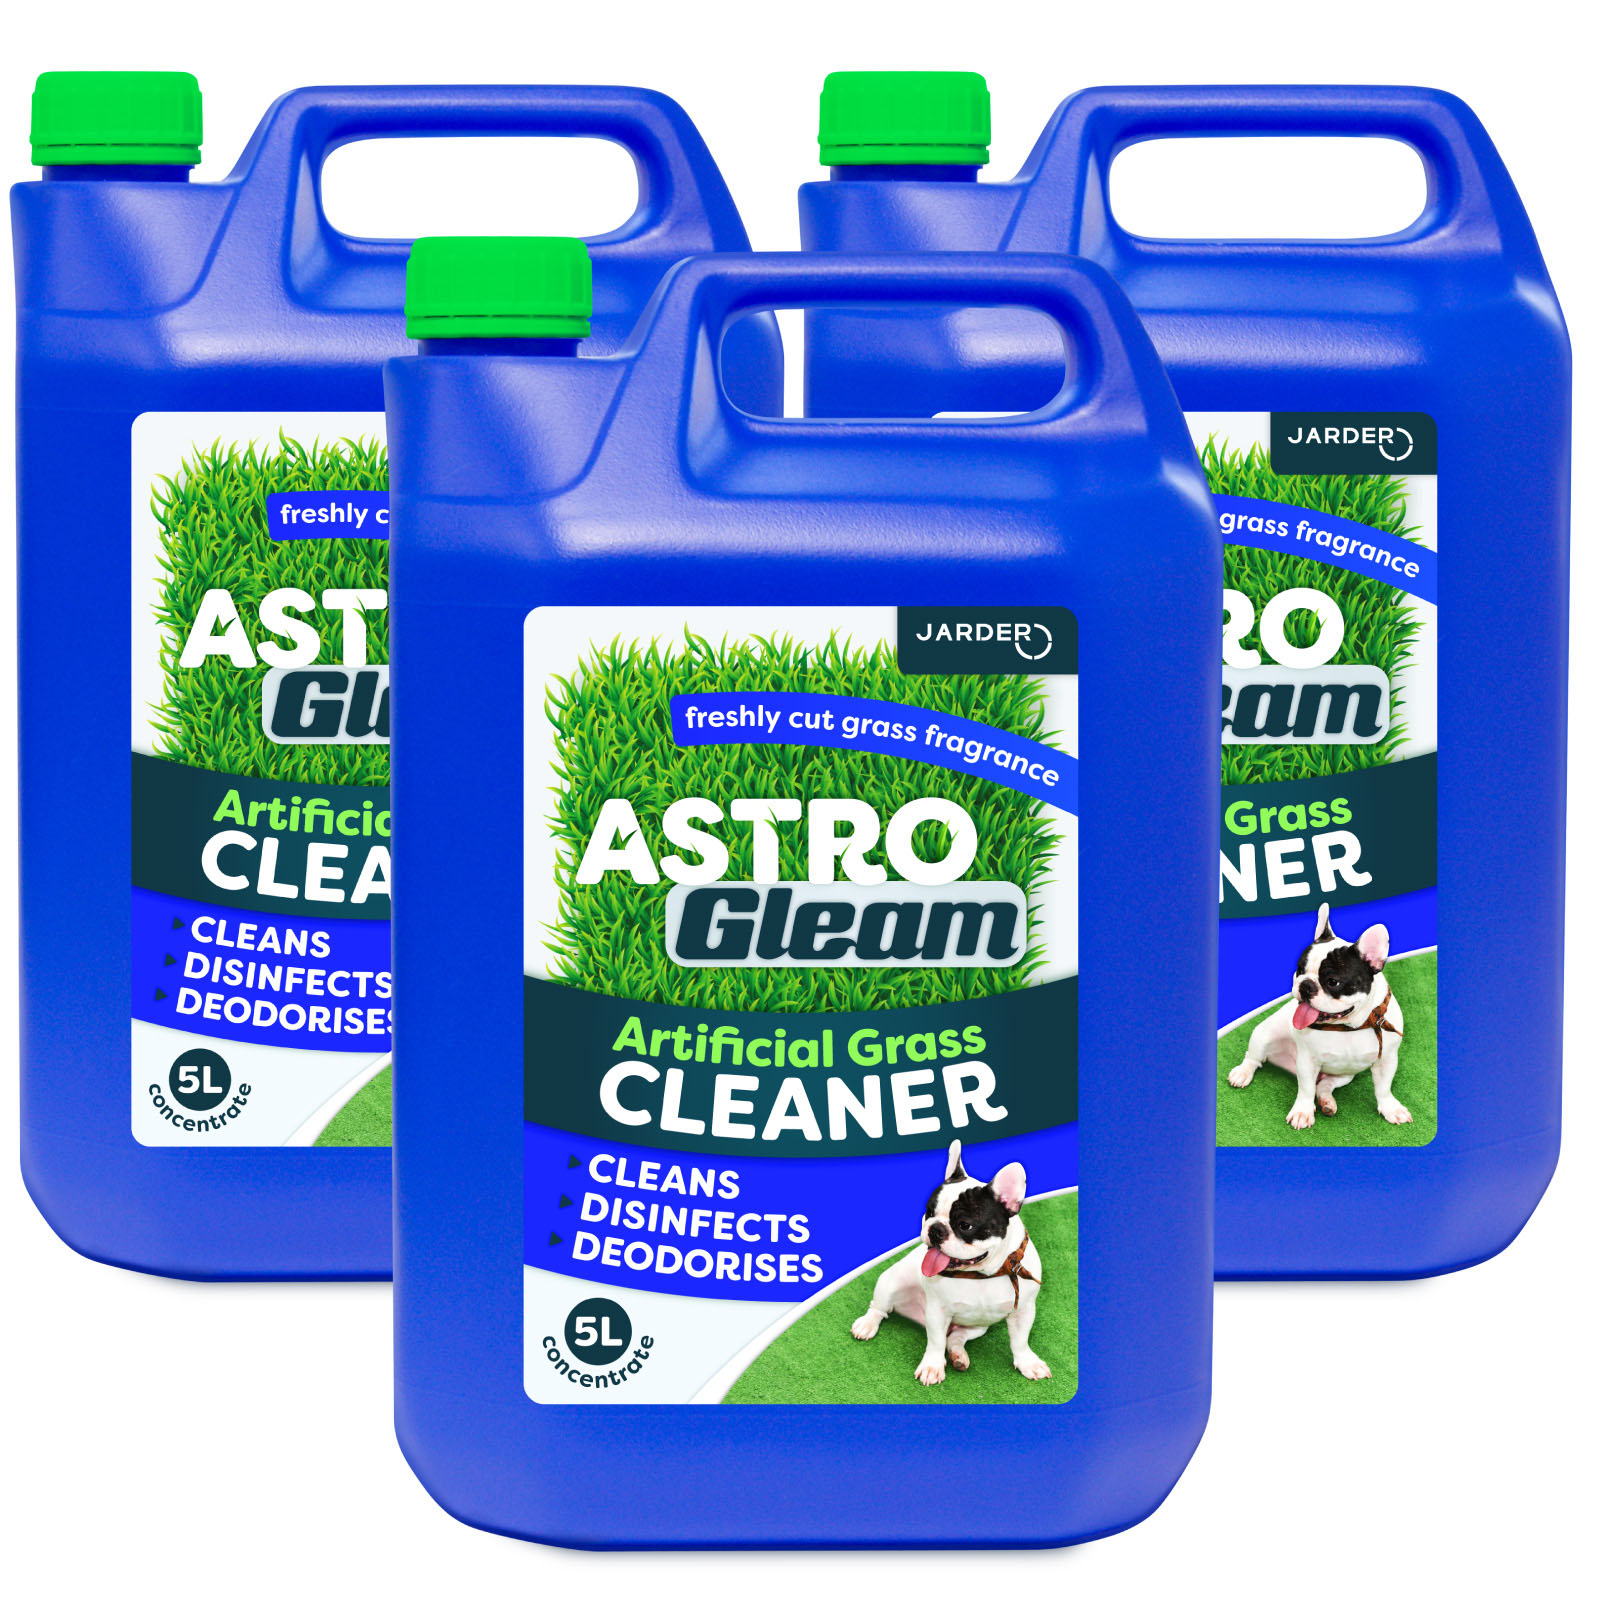 Jarder Artificial Grass Cleaner - Astro Gleam 5L (3 Pack)